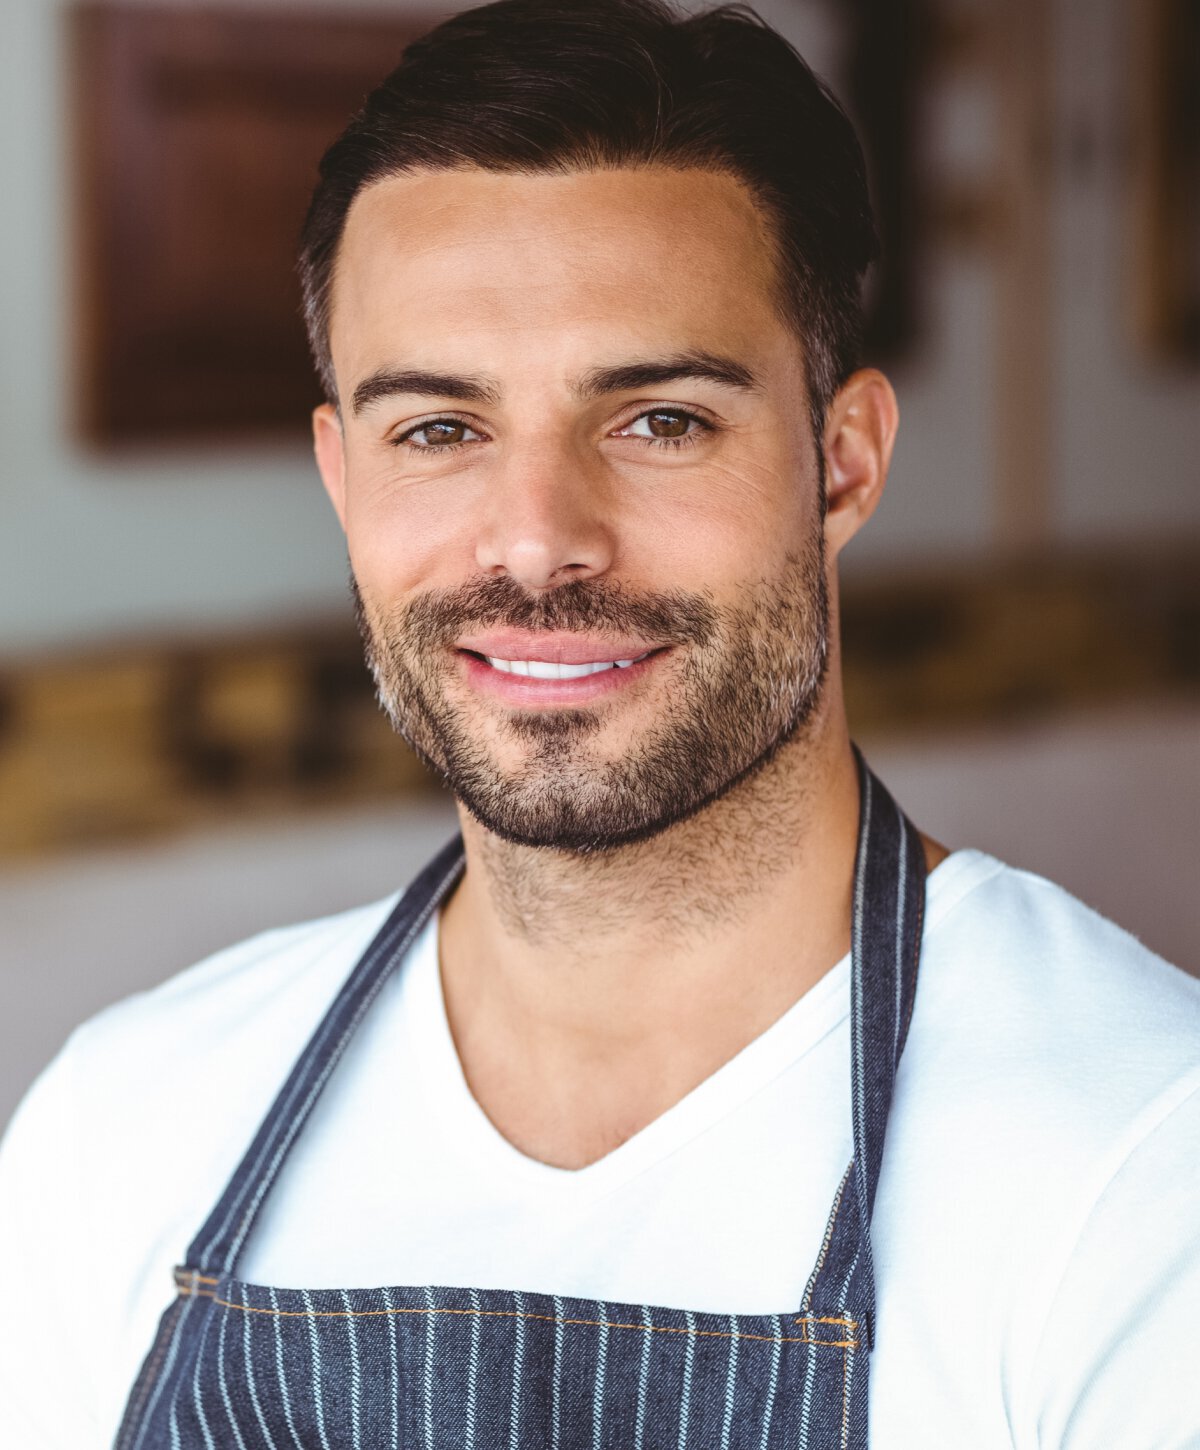 male dental services patient model wearing a blue apron and smiling